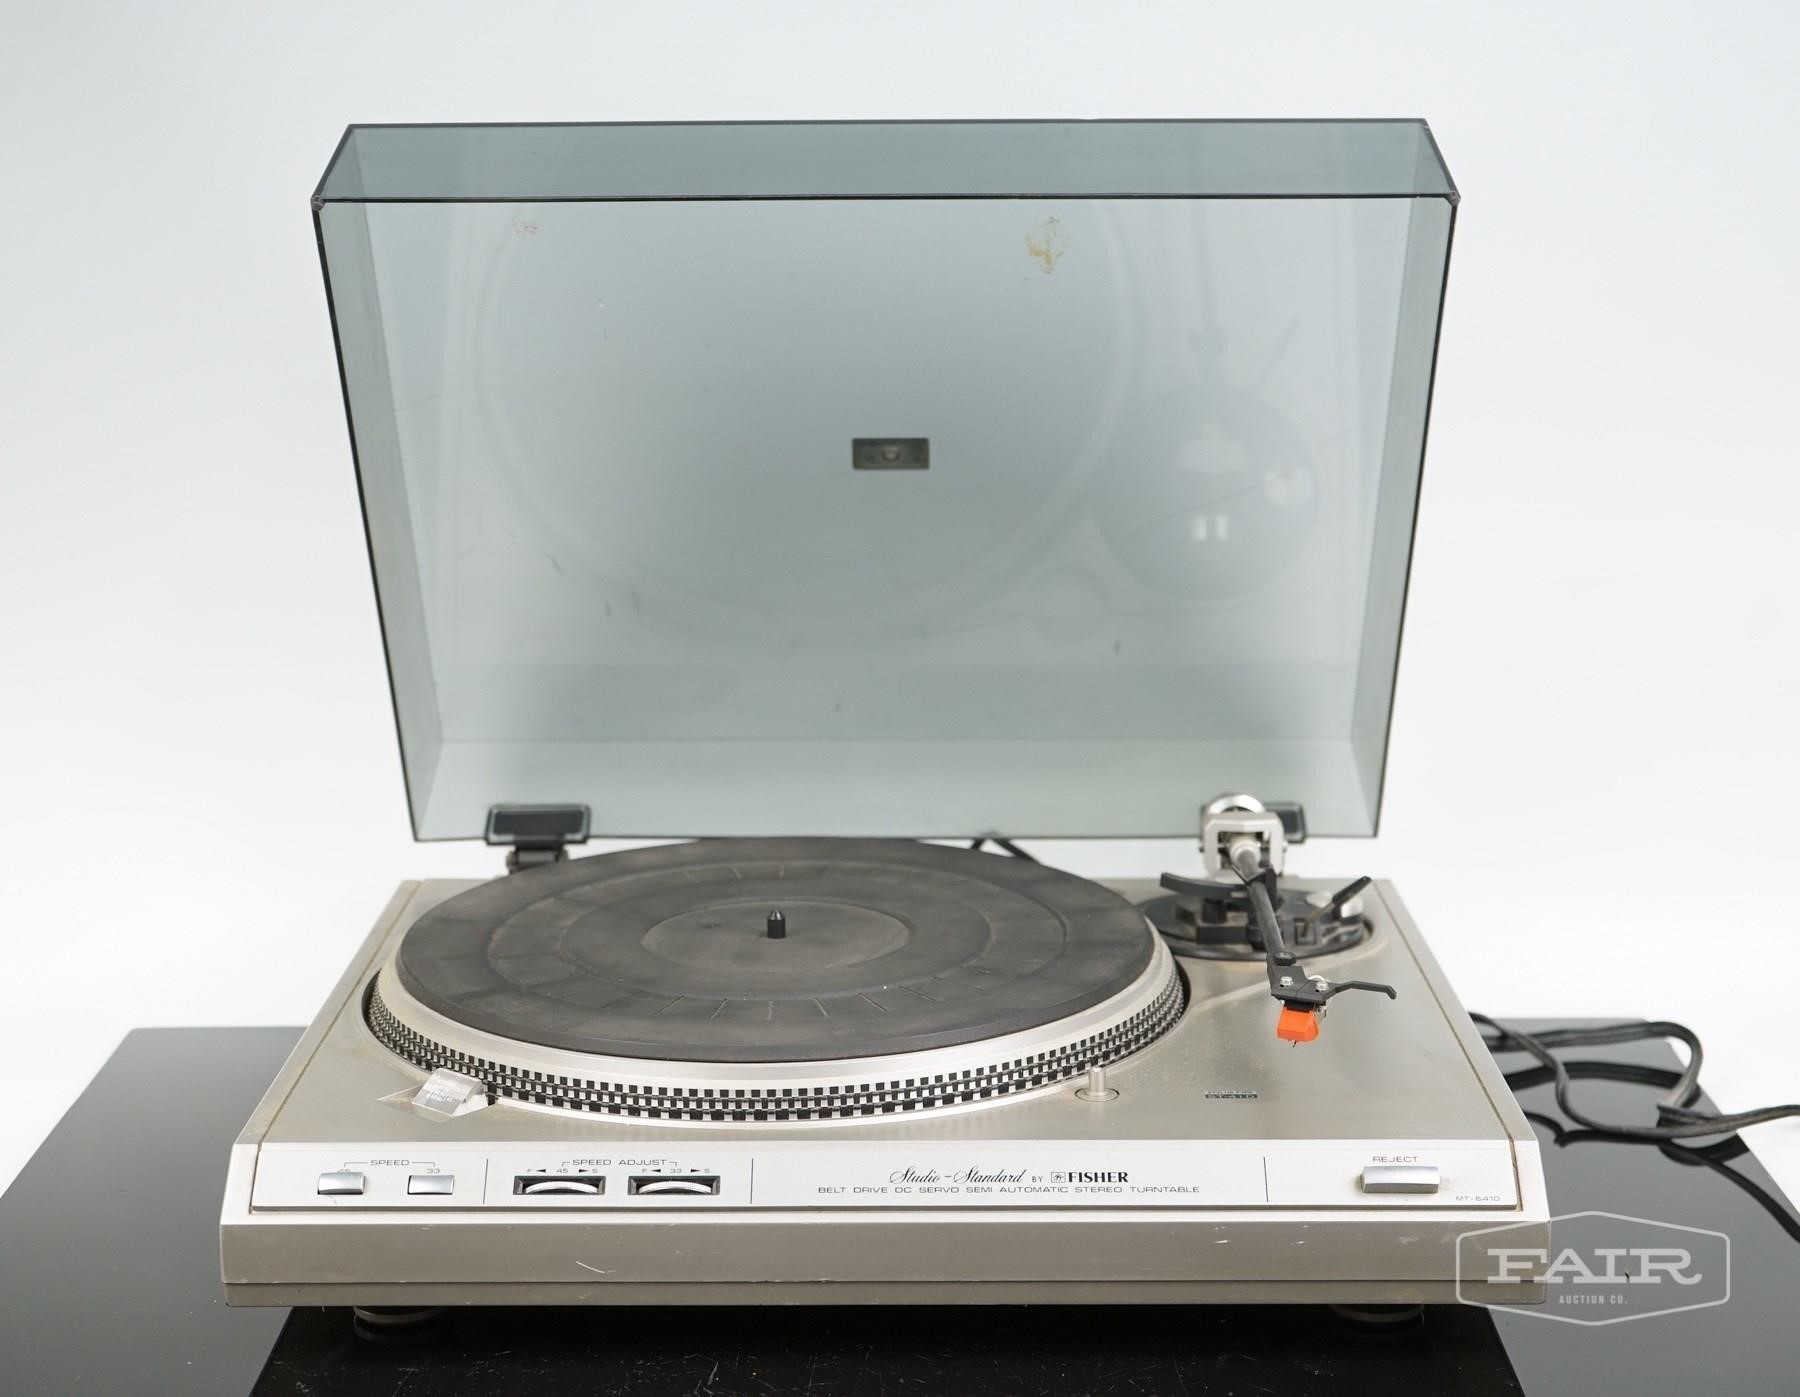 Studio-Standard by Fisher Stereo Turntable | Fair Auction Company, LLC